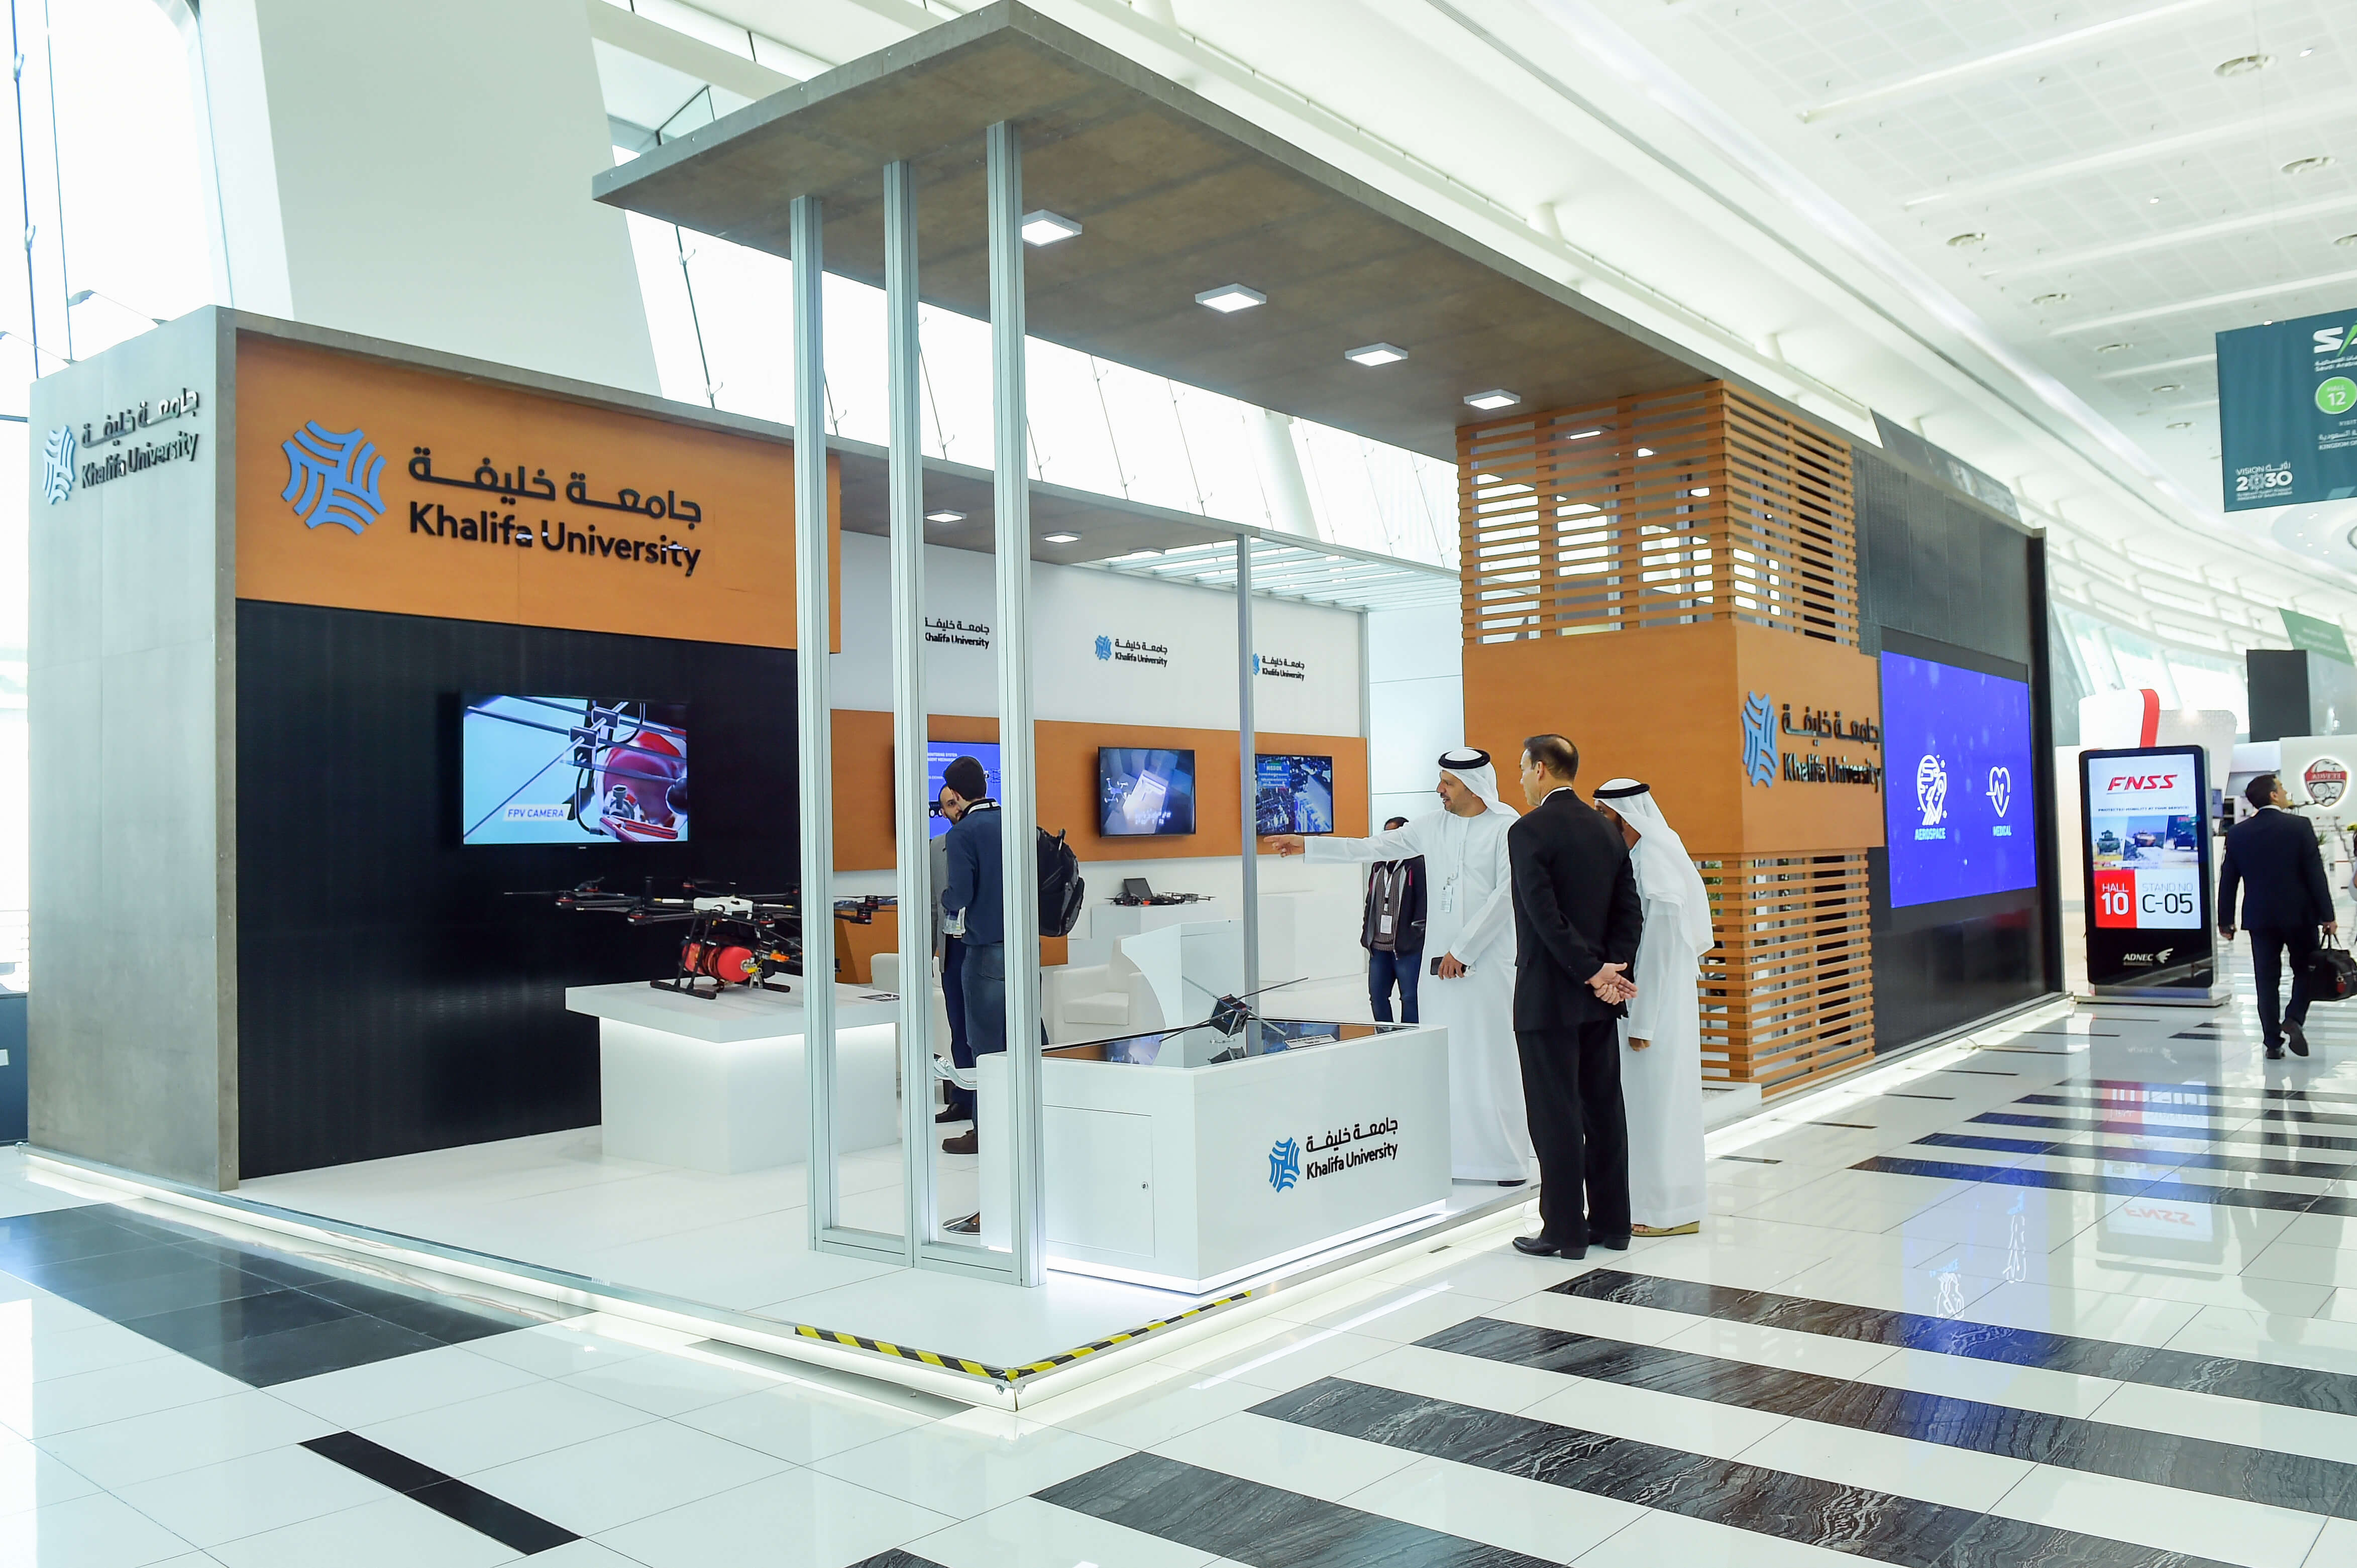 Khalifa University to Showcase Cutting-Edge Research Advances in Drones and Robotics Technologies at IDEX 2019